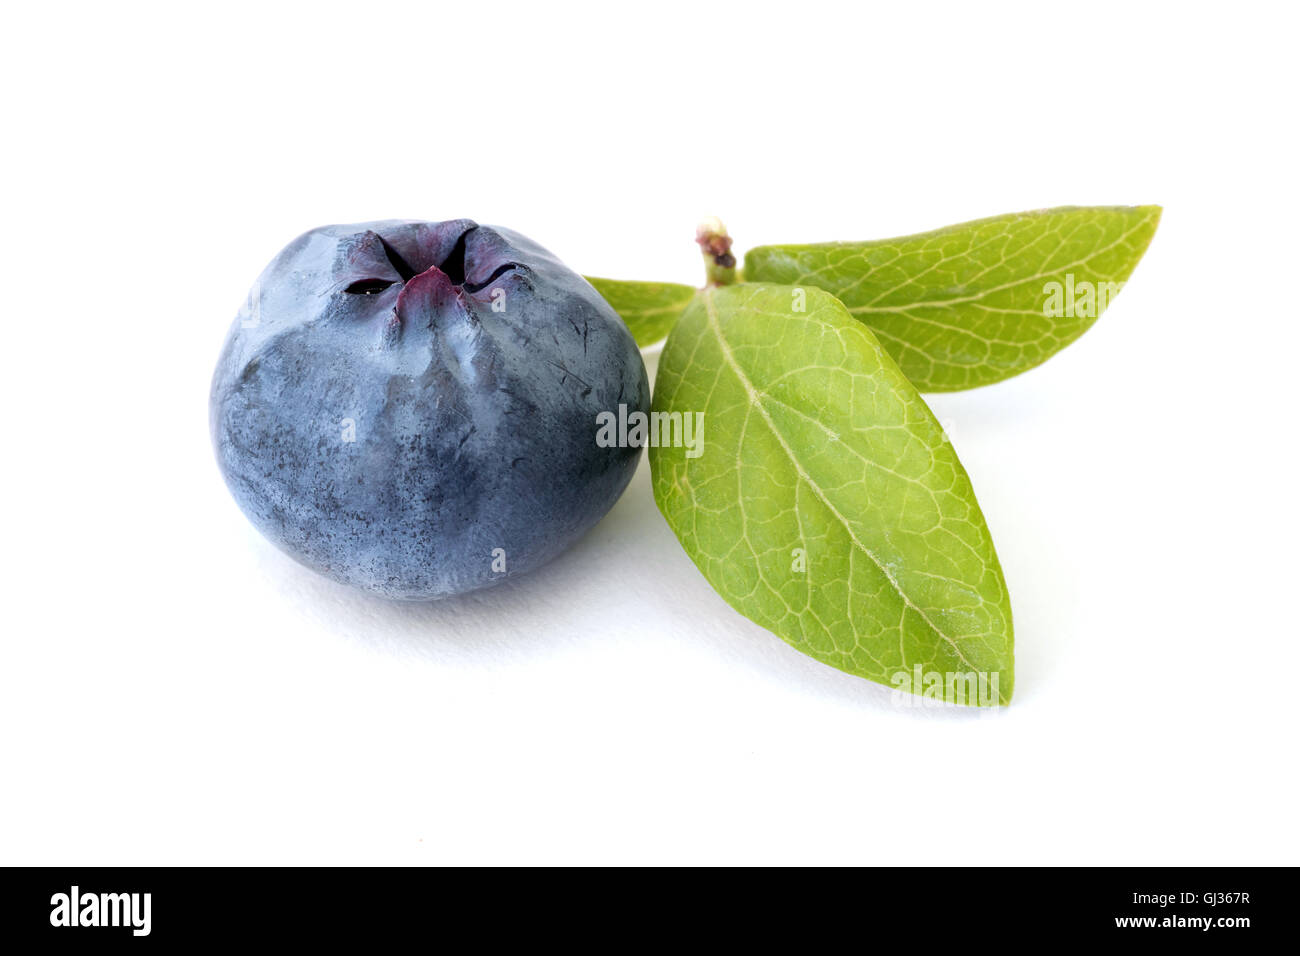 Single blueberry with leaves to right on white background Stock Photo